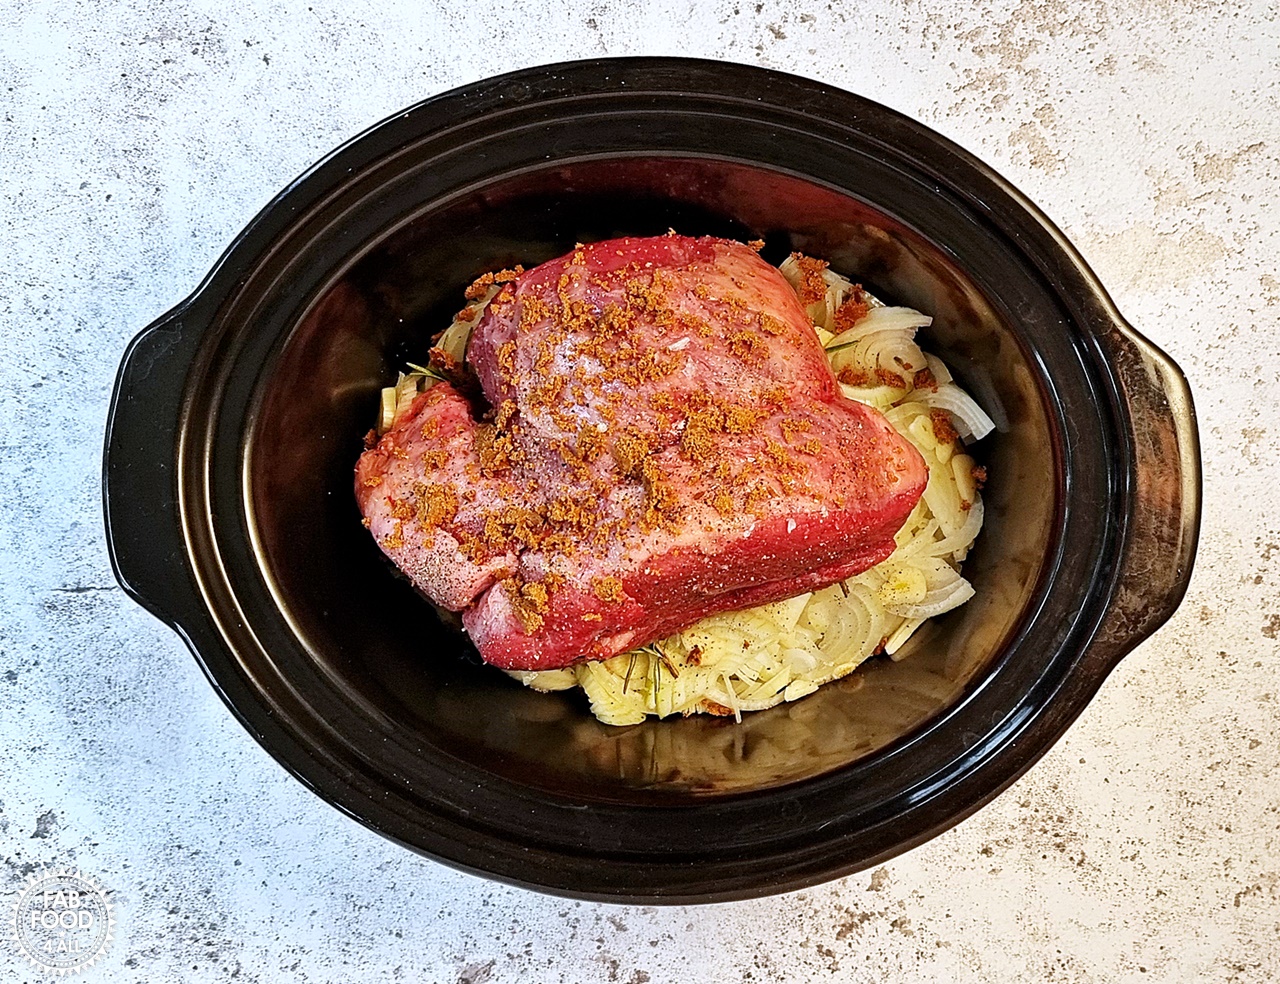 Raw beef brisket joint in slow cooker seasoned with a stock cube, salt & pepper.